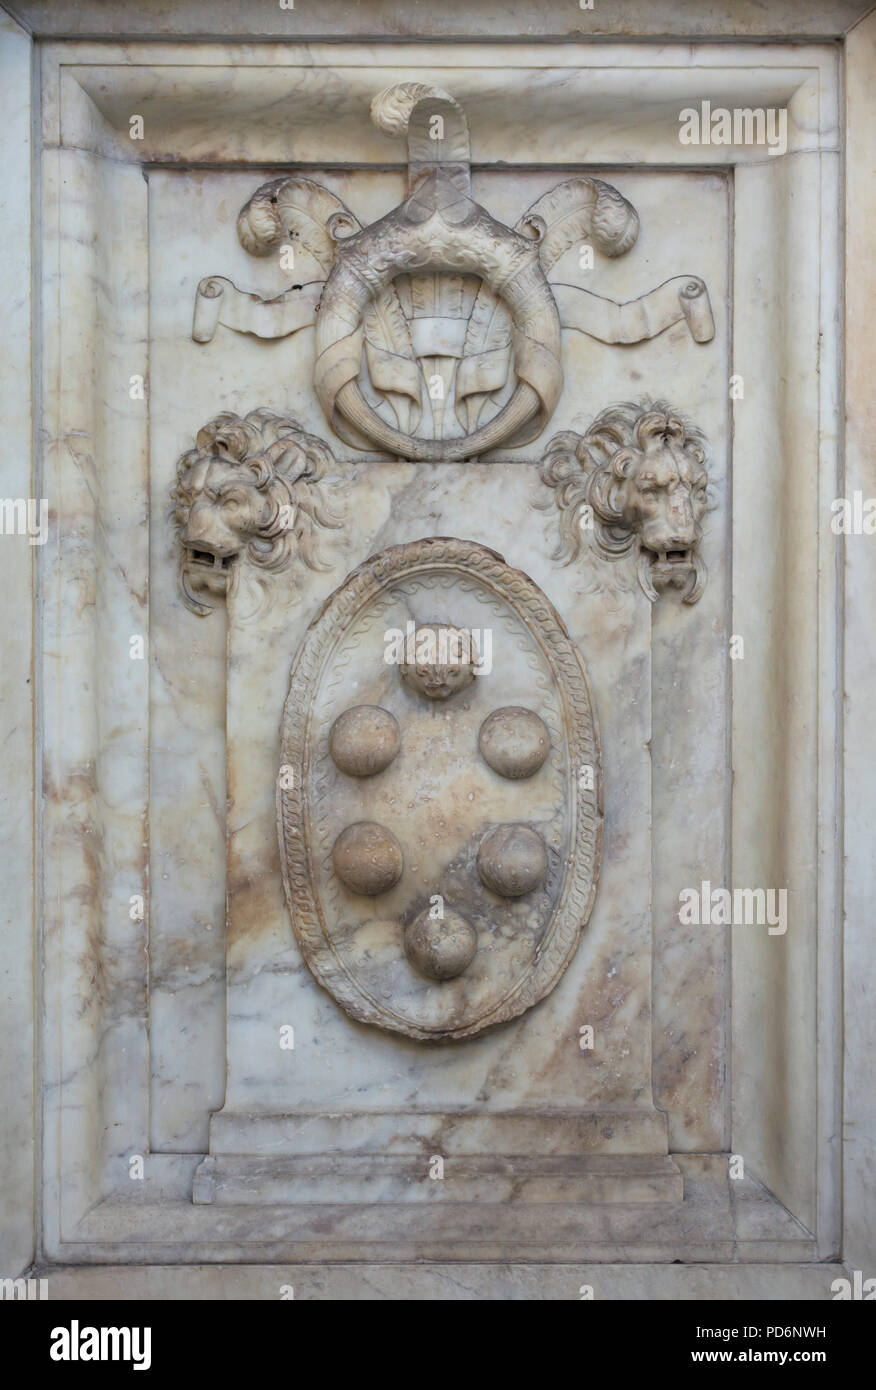 Coat of arms of the House of Medici depicted on the base of the Monument to Giovanni delle Bande Nere (Lodovico de' Medici) by Italian Renaissance sculptor Bartolommeo Bandinelli (1540) in Piazza San Lorenzo in Florence, Tuscany, Italy. Stock Photo